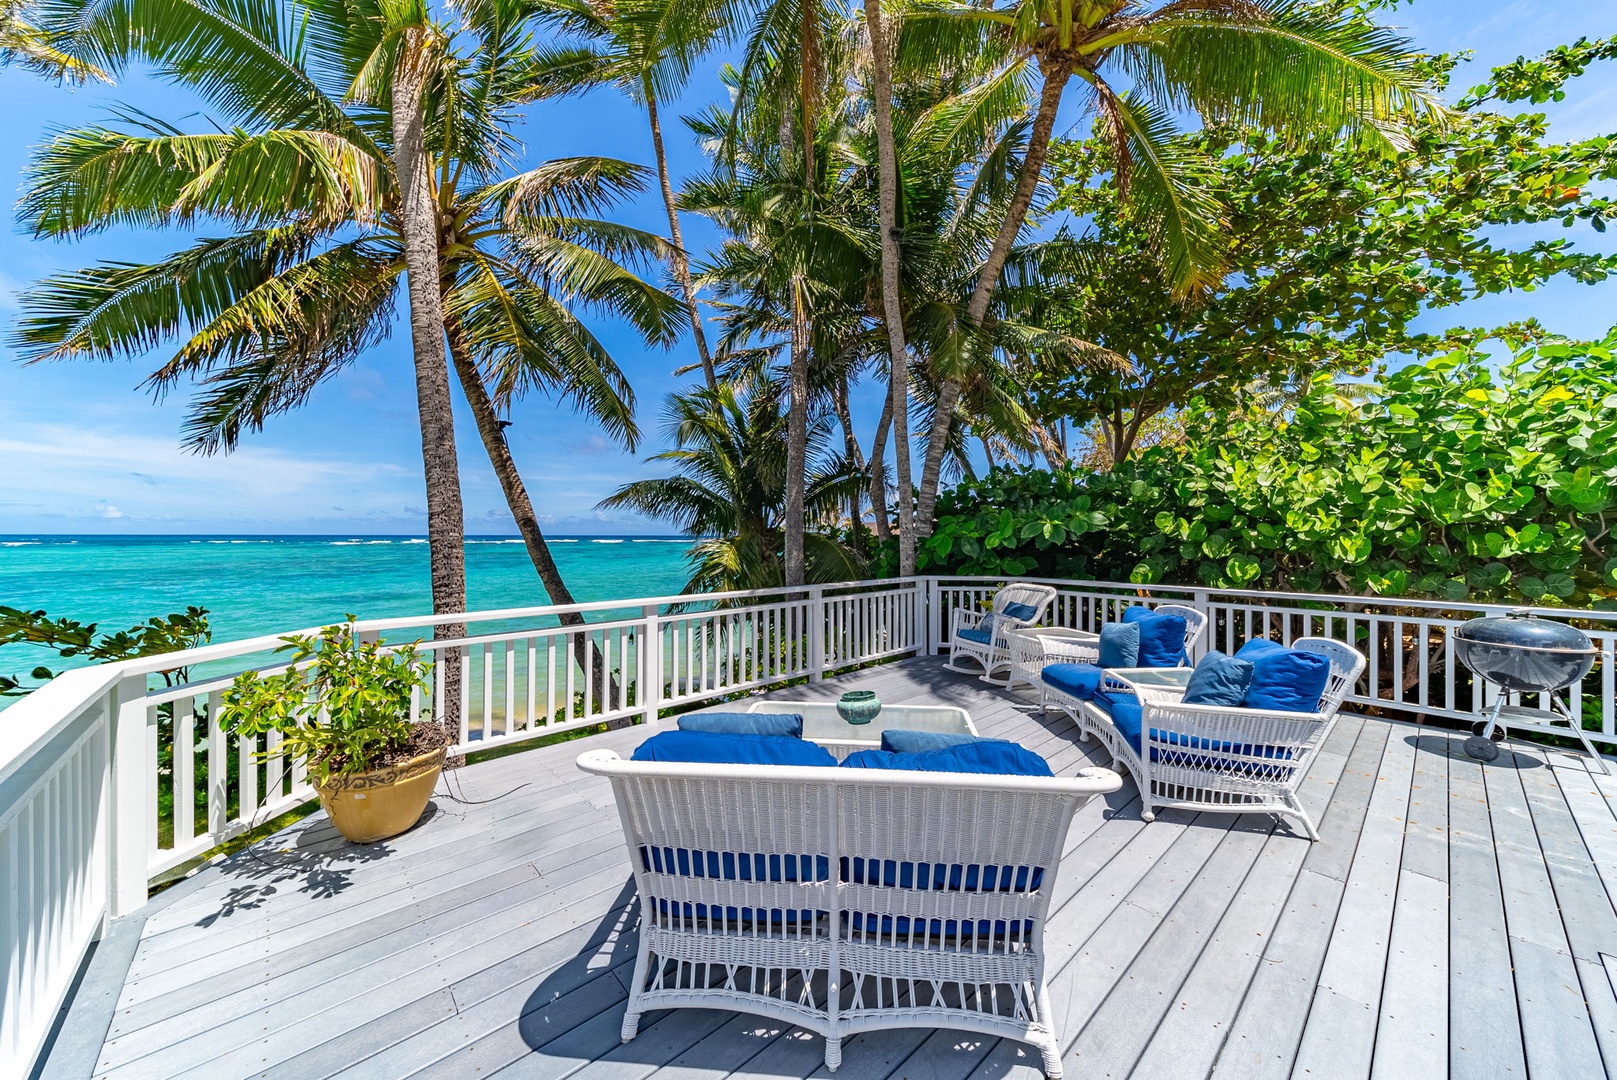 Waimanalo Vacation Rentals, Mana Kai at Waimanalo - Equipped with comfy outdoor furniture for serene beach-watching, letting the gentle waves soothe your senses.